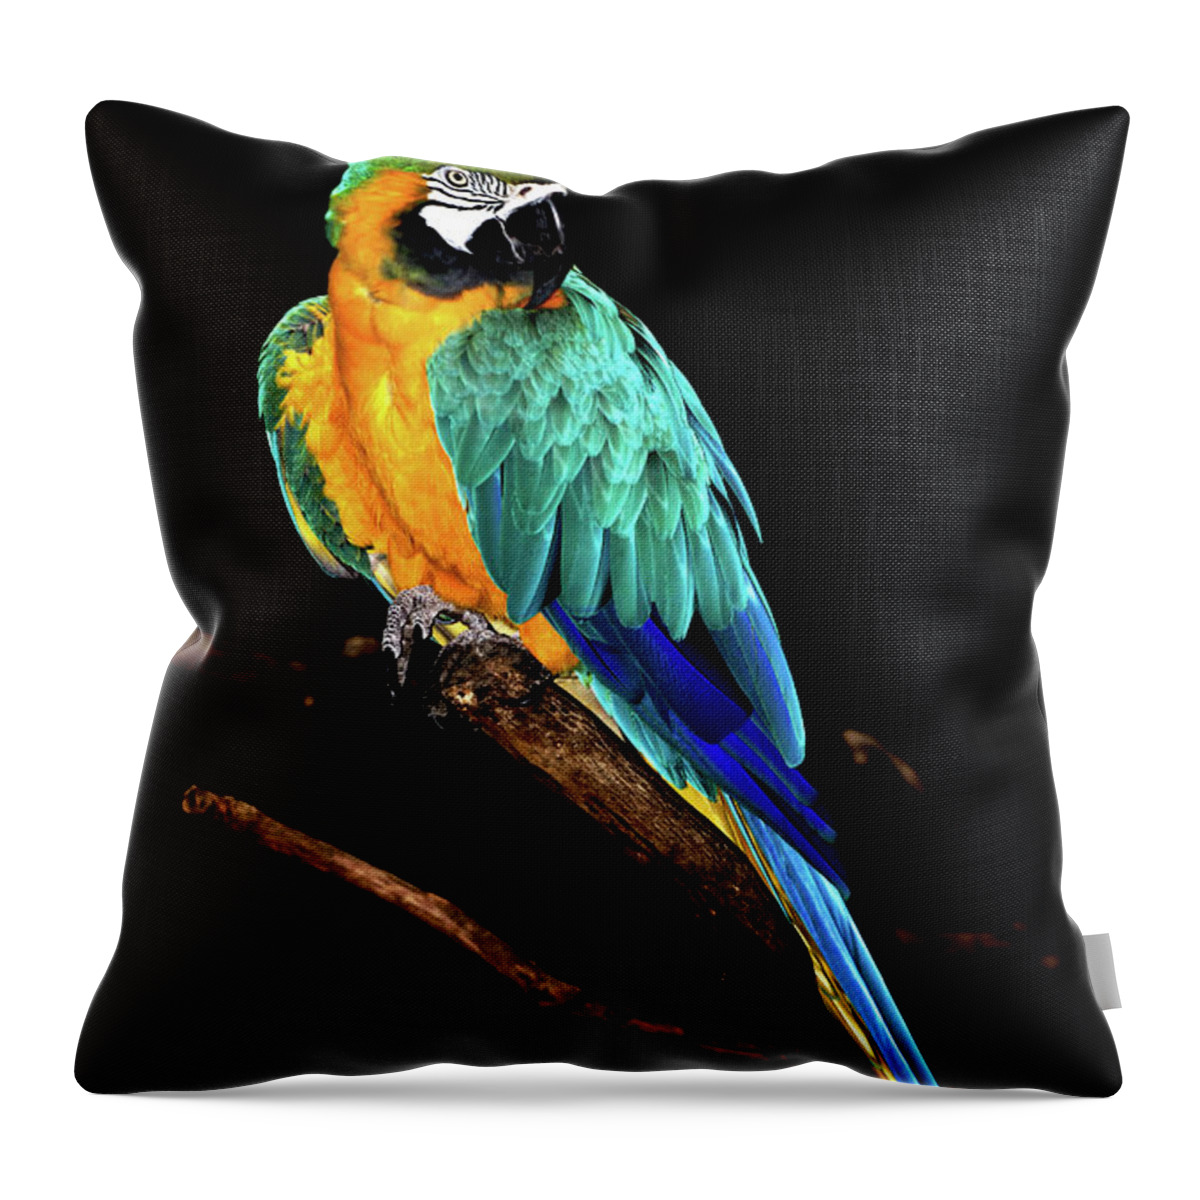 Macaw Throw Pillow featuring the photograph Macaw by David Keith Jr. (all Rights Reserved)